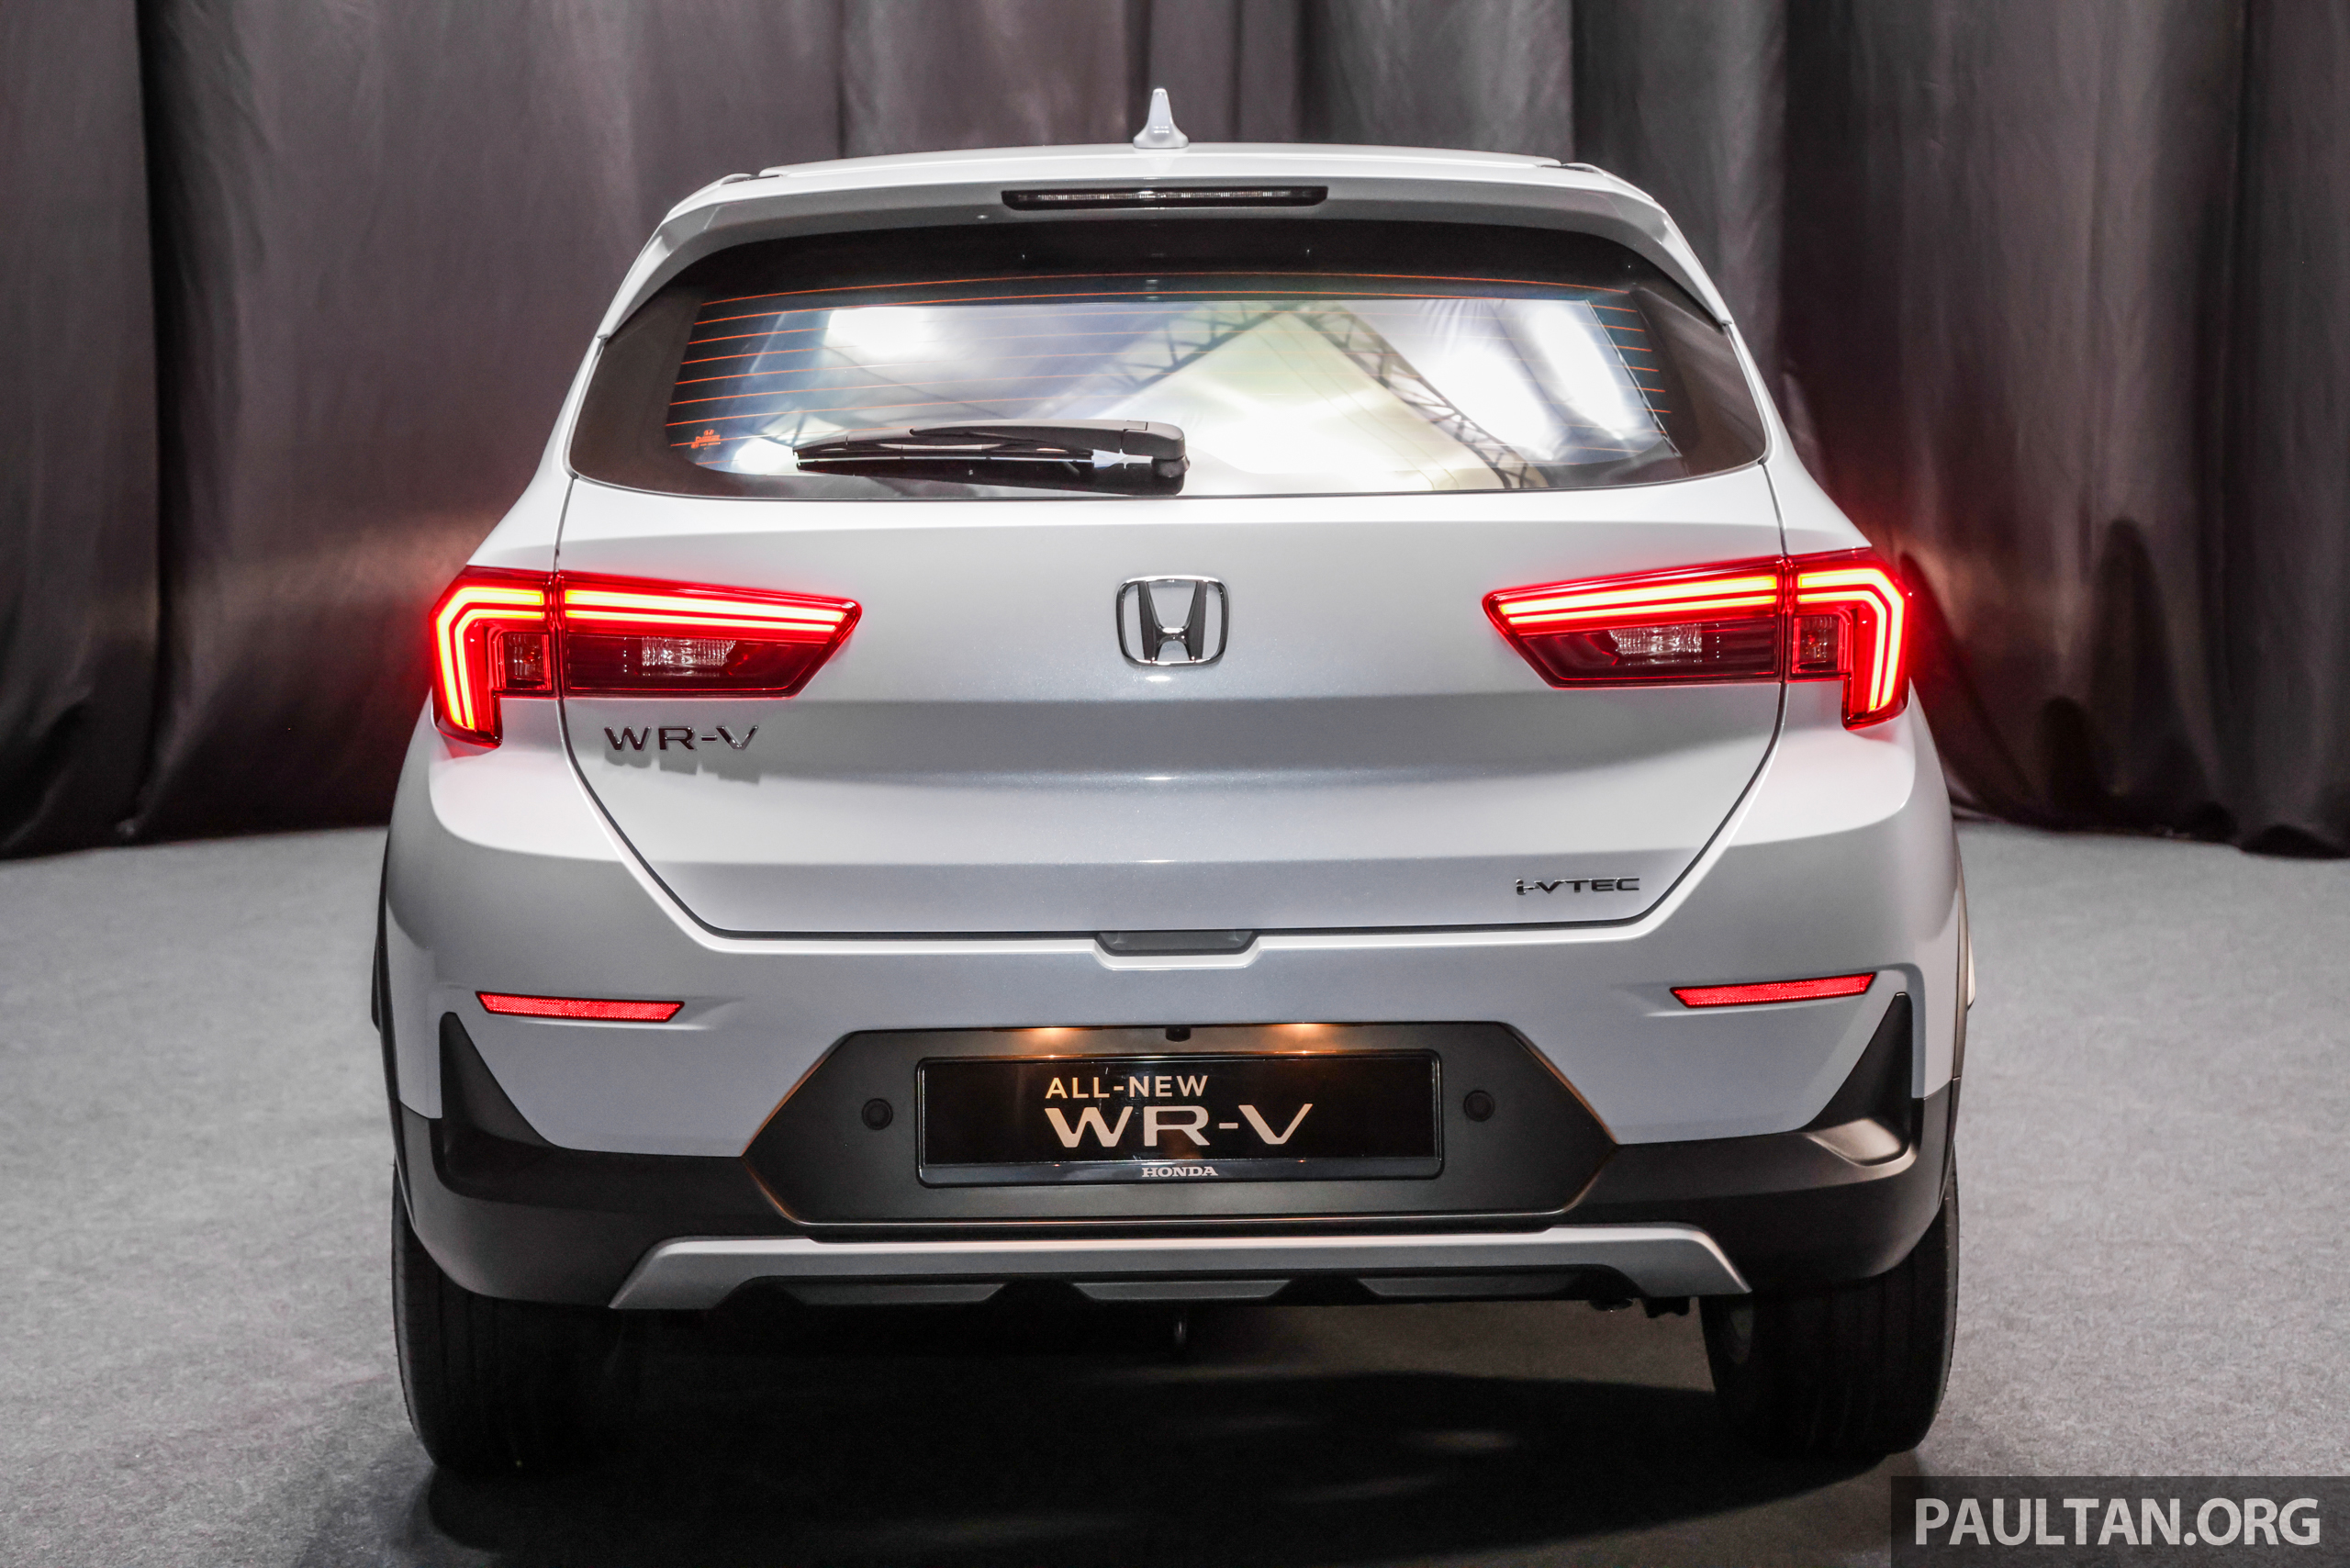 Honda WRV 2023 in Malaysia News, Price, Specs, Review at Paul Tan